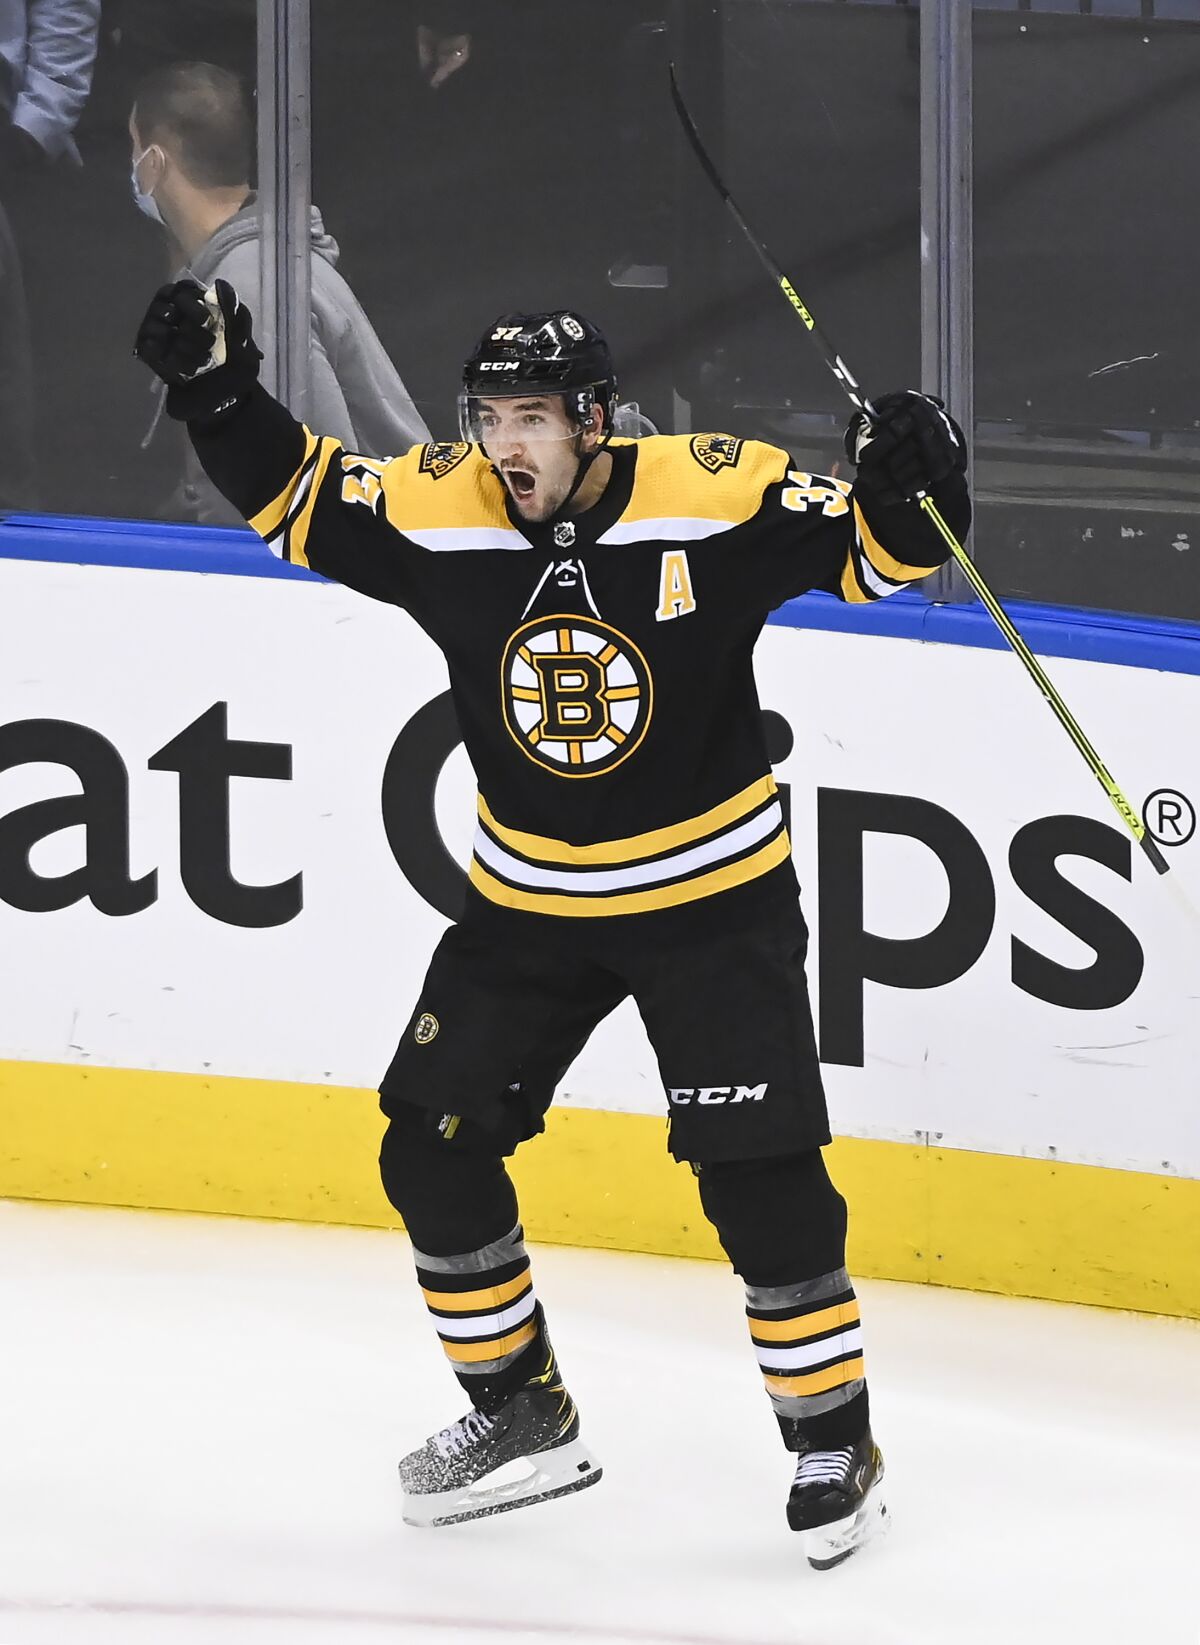 Boston Bruins center Patrice Bergeron (37) reacts after scoring the game winning goal against the Carolina Hurricanes during the second overtime period of an NHL hockey Eastern Conference Stanley Cup playoff game in Toronto, Wednesday, Aug. 12, 2020. (Nathan Denette/The Canadian Press via AP)